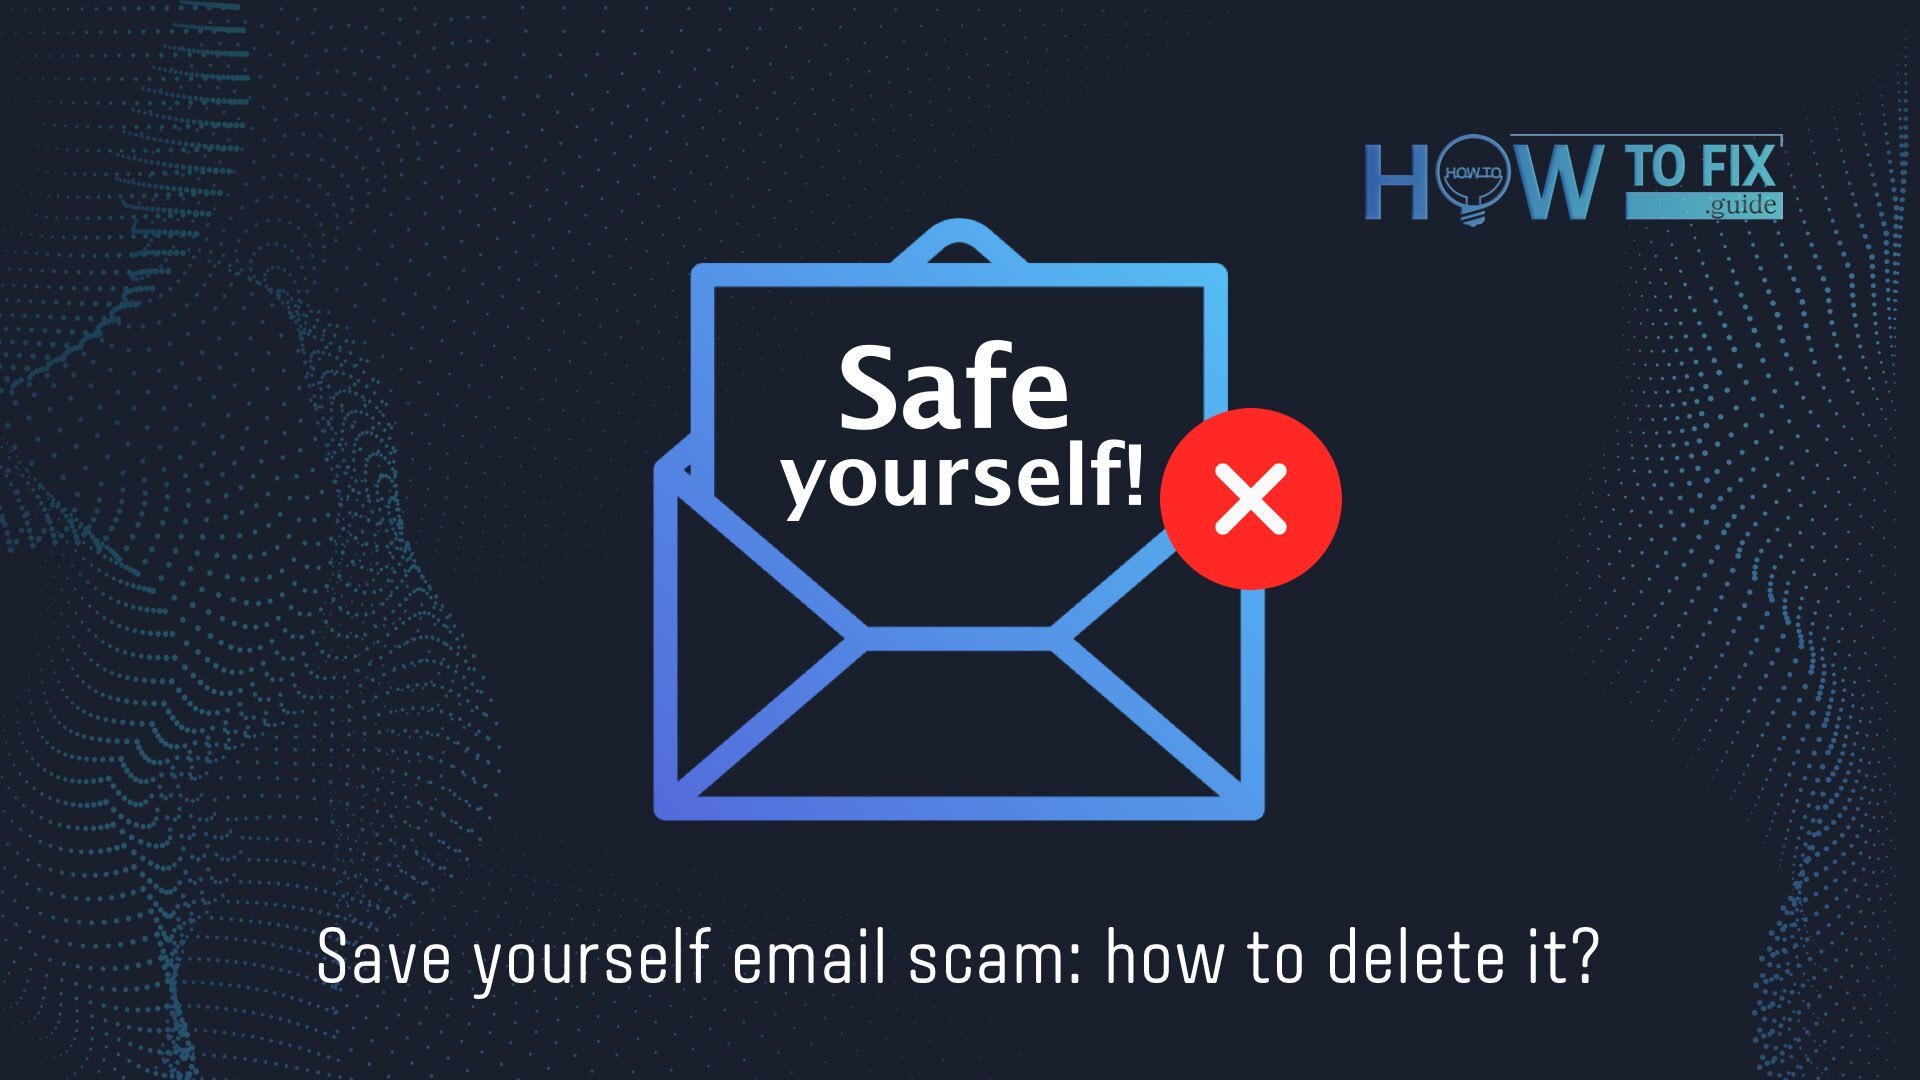 Save Yourself Email Scam: How to delete it